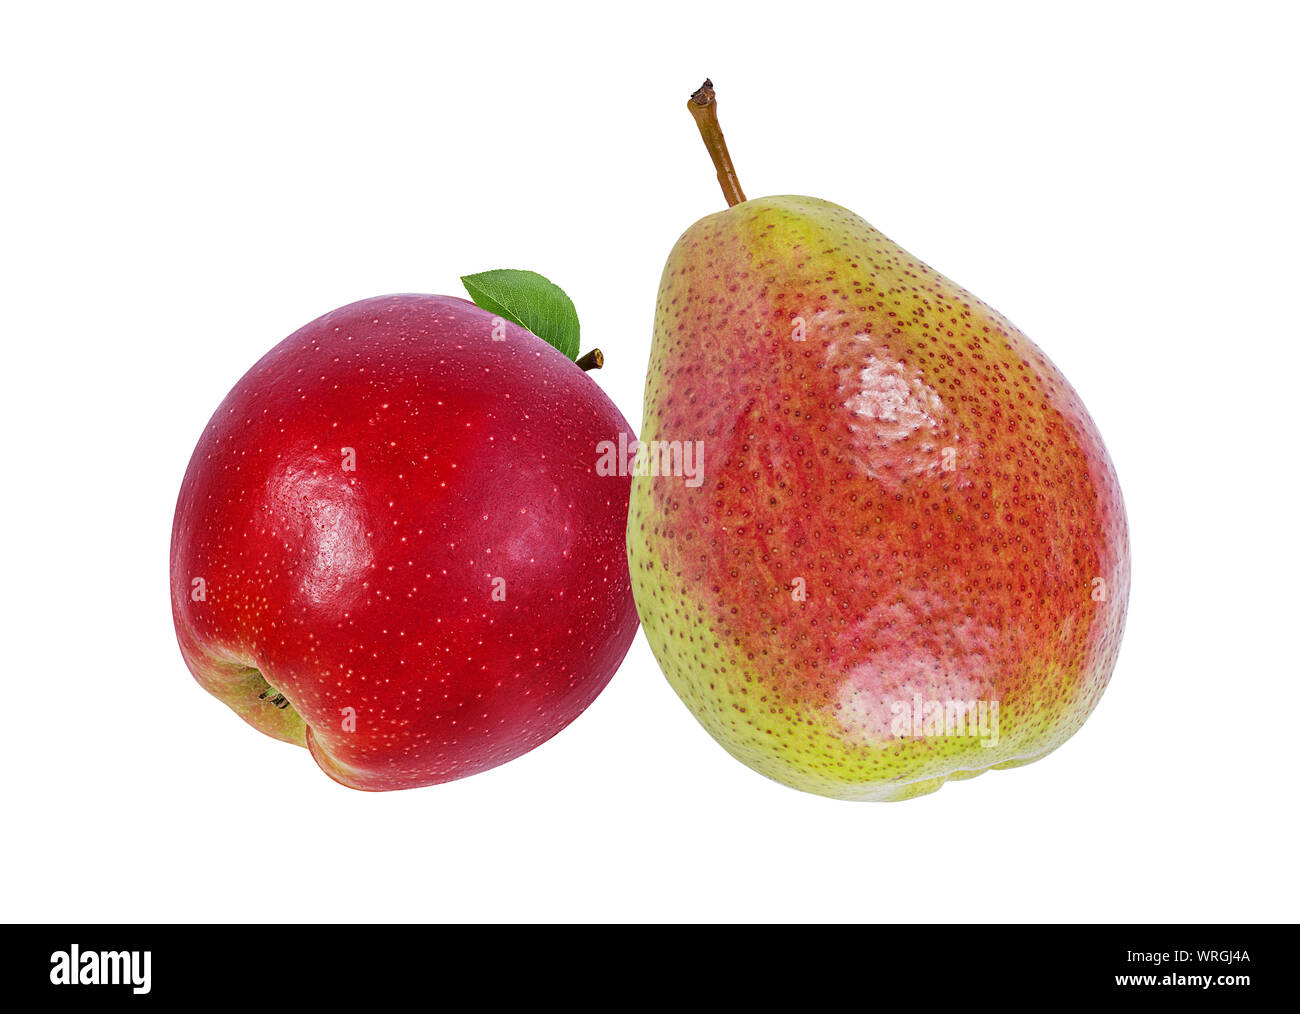 apples and pear isolated on white background Stock Photo